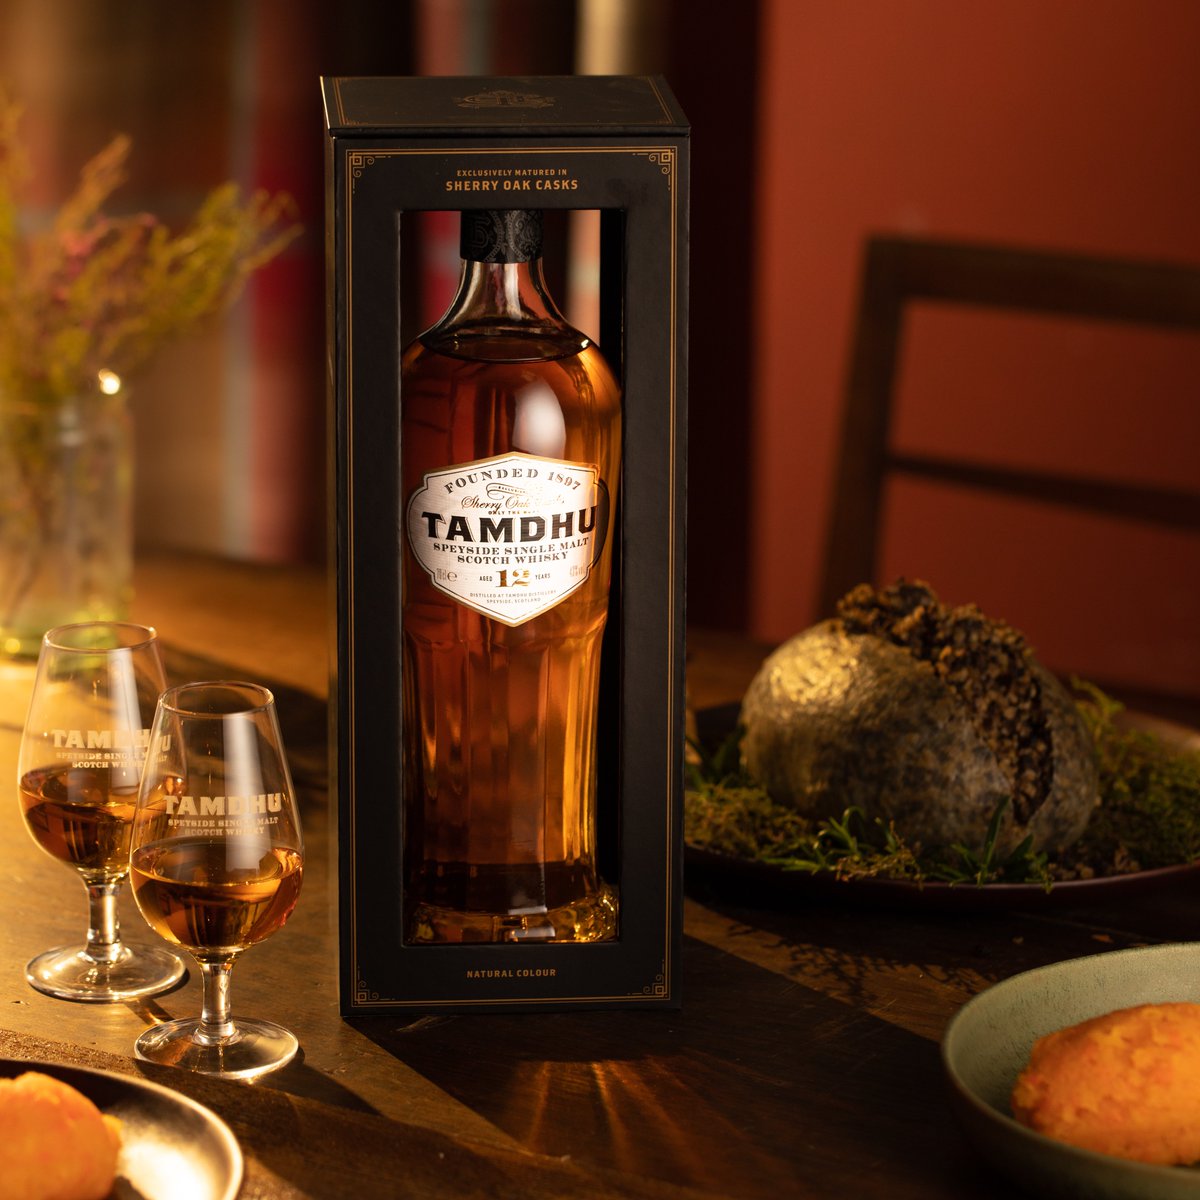 There's still time to raise your pens and dedicate your best poetry to Robert Burns. Submit your own whisky-inspired Burns Night poem for a chance to win a bottle of multi-award-winning Tamdhu 18 Year Old. Entries close Sunday 21st Jan. T&Cs apply. tamdhu.com/burns-poetry-c…